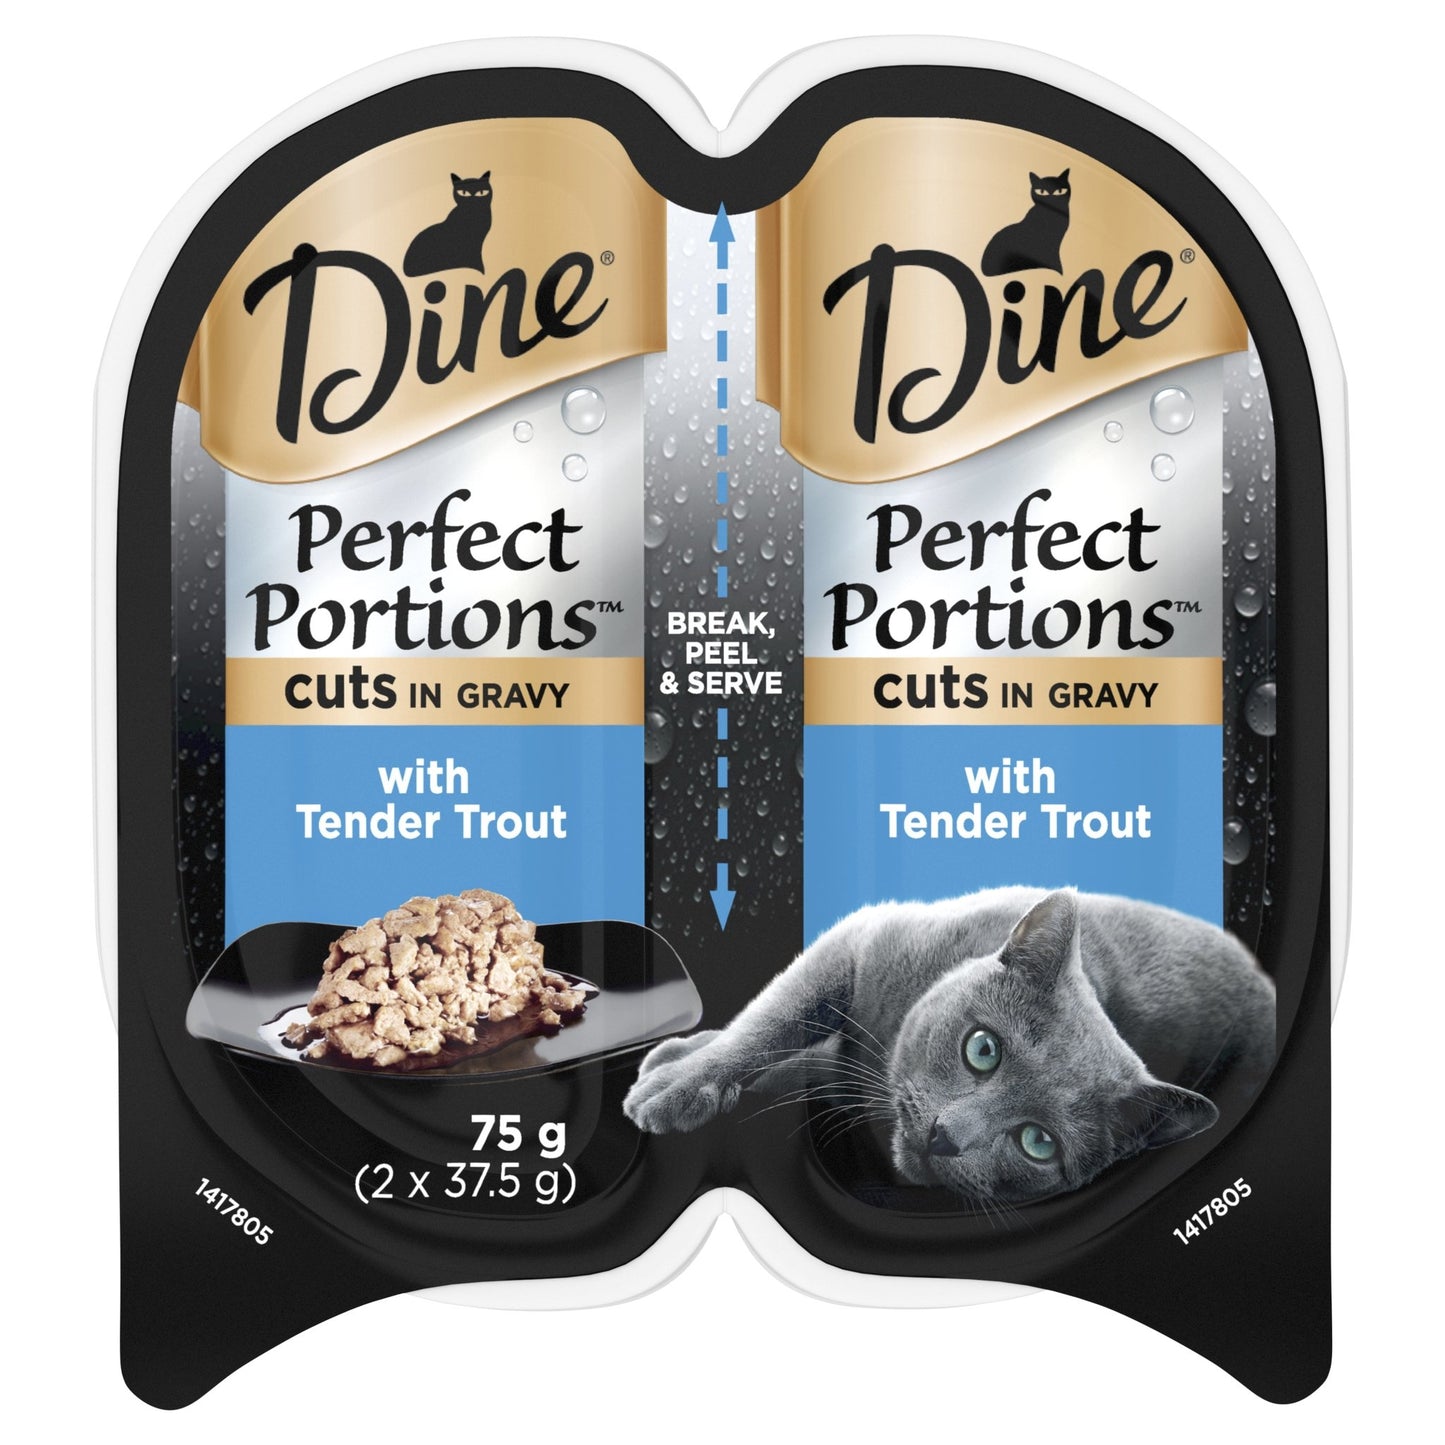 Dine Perfect Portions 75g Cuts in Gravy with Trout - Woonona Petfood & Produce